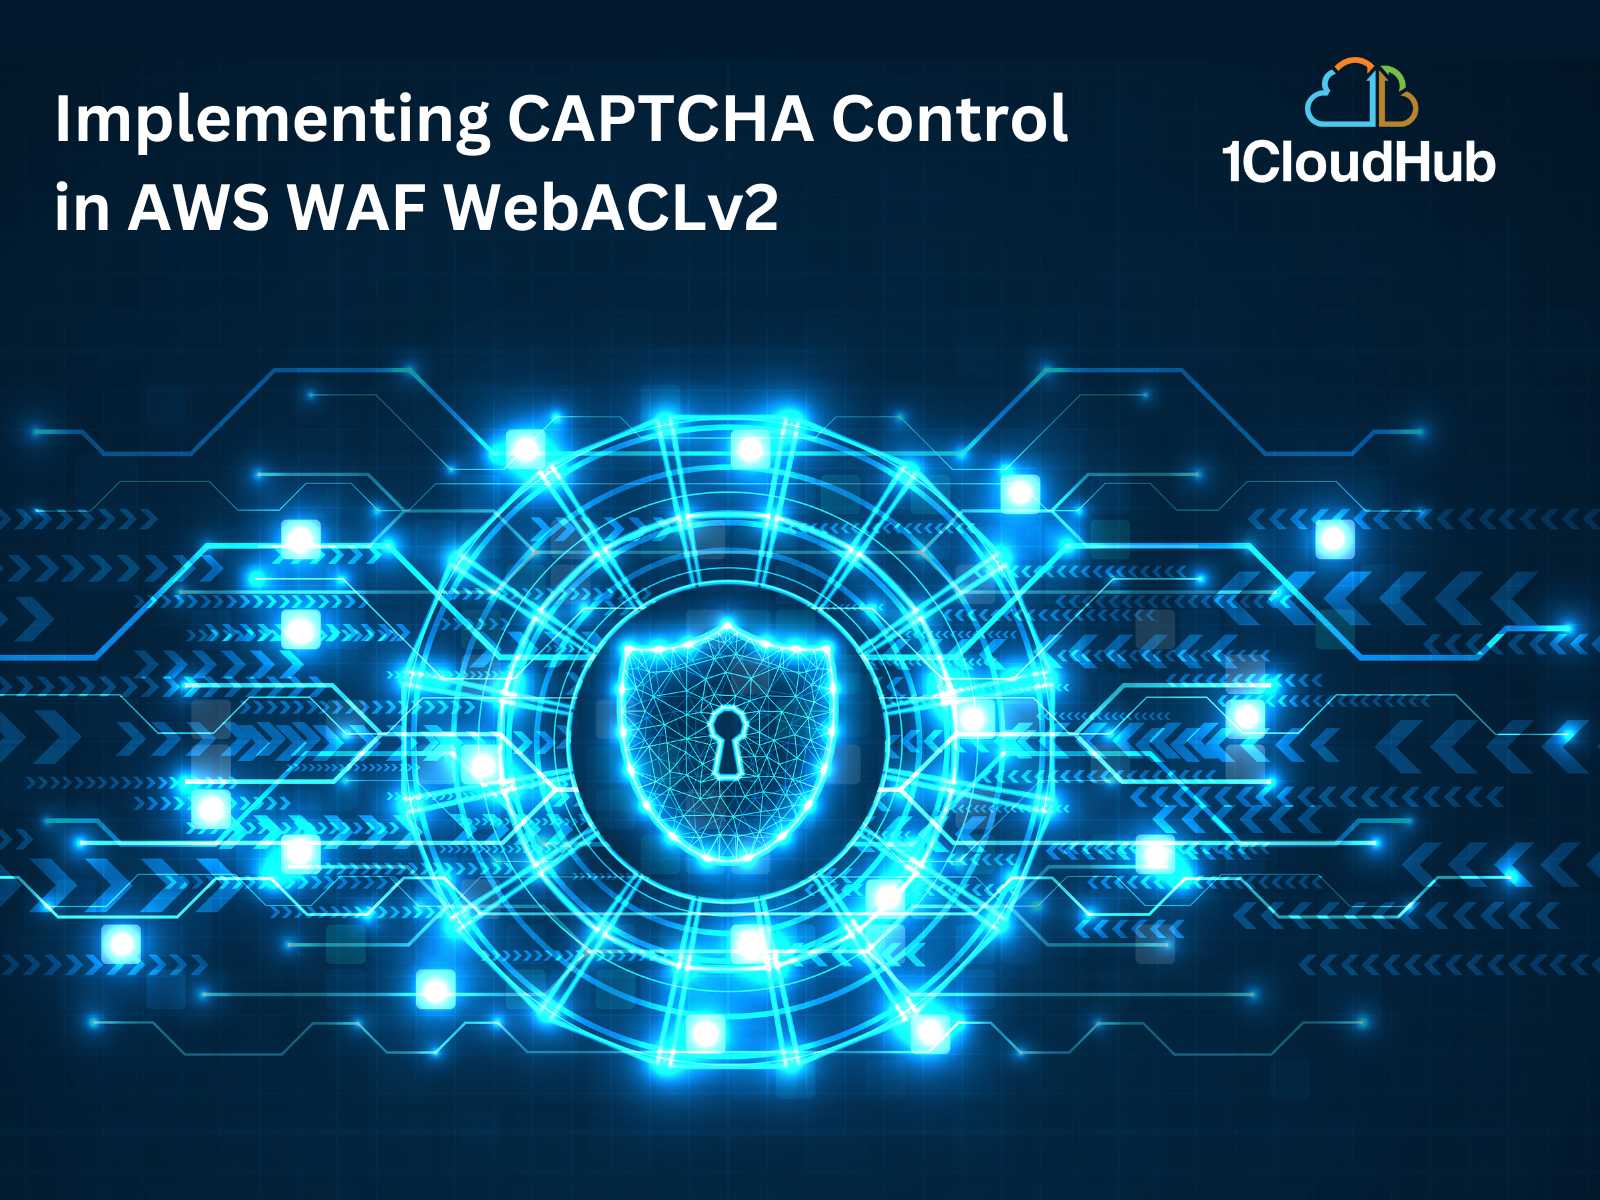 Implementing CAPTCHA Control in AWS WAF WebACLv2